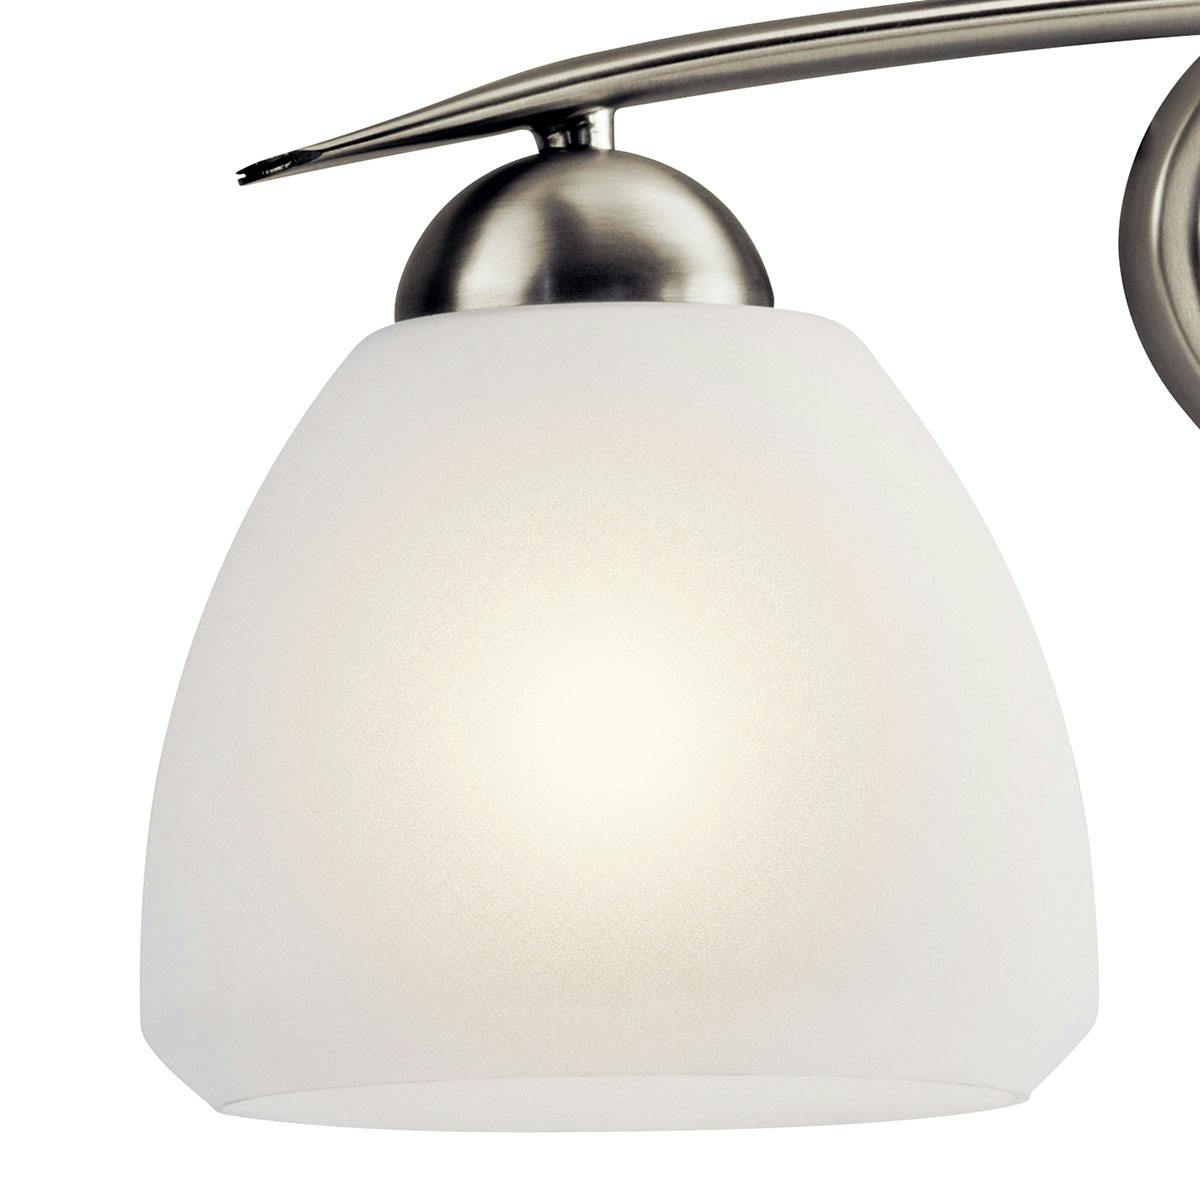 Close up view of the Calleigh 3 Light Vanity Light Nickel on a white background